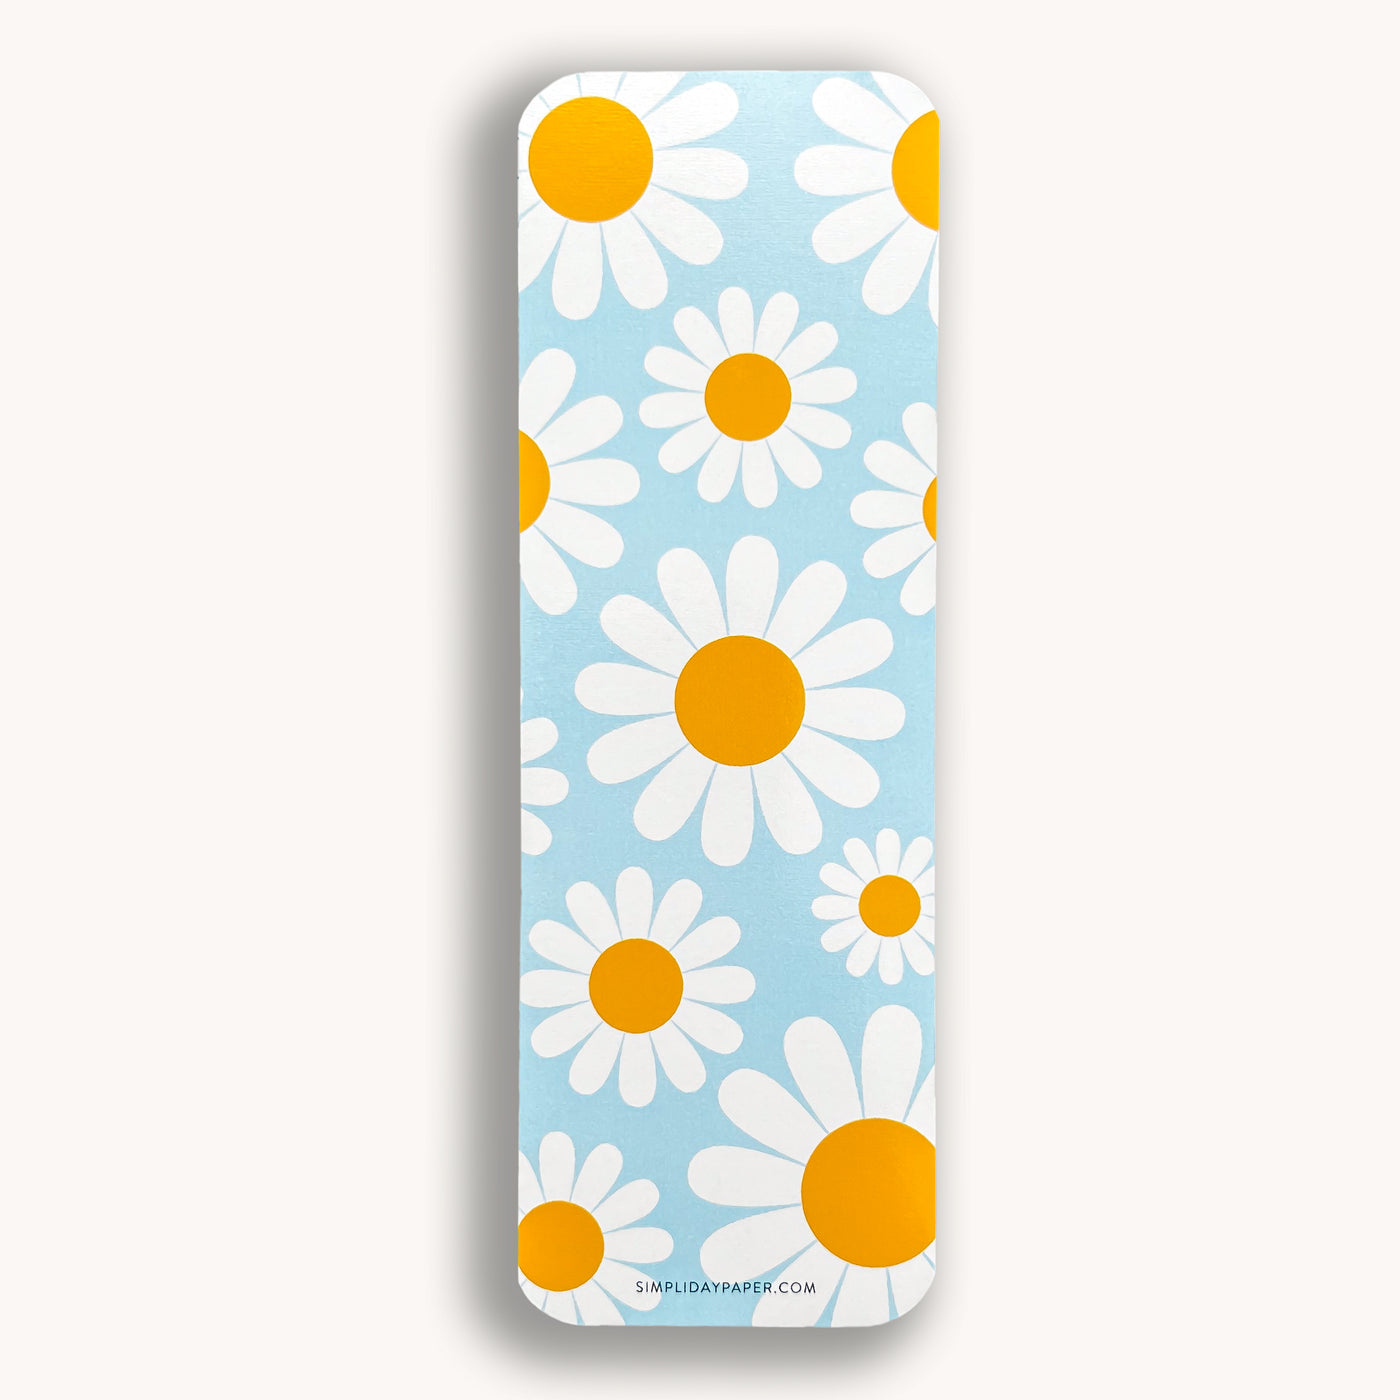 Daisies on a sky blue background bookmark with rounded corners by Simpliday Paper, Olga Nagorna.